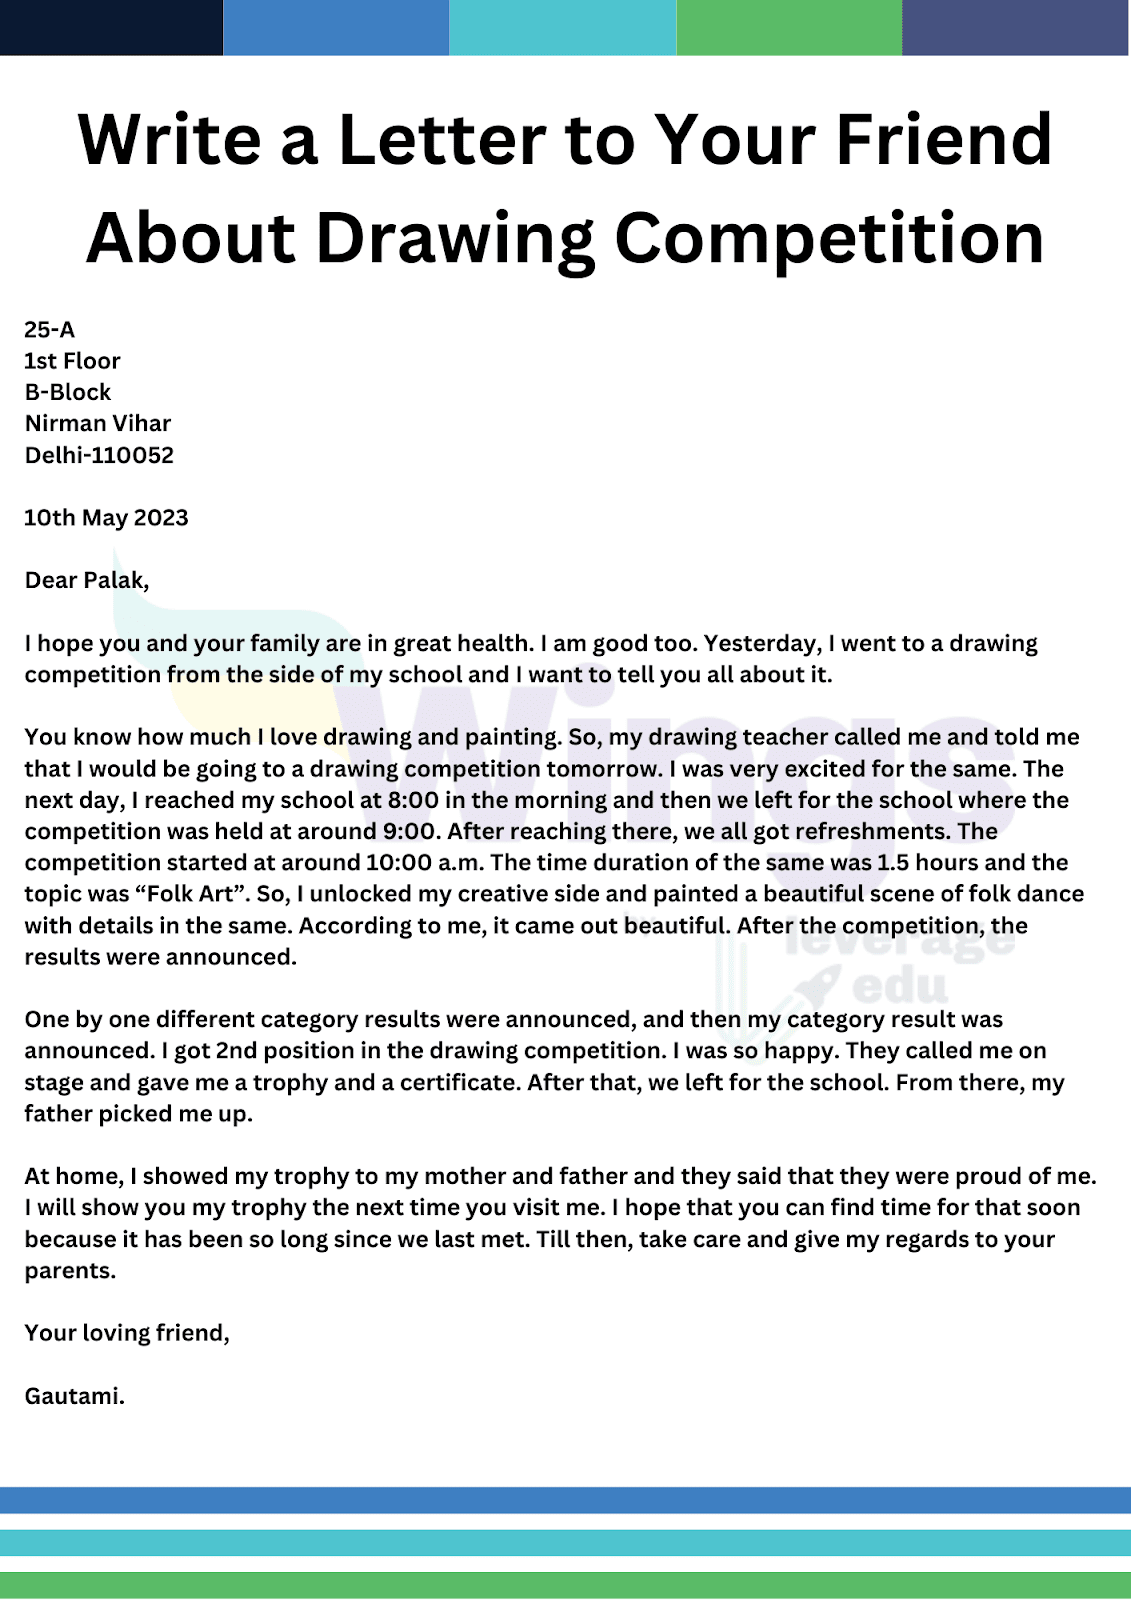 Write a Letter to Your Friend about Drawing Competition